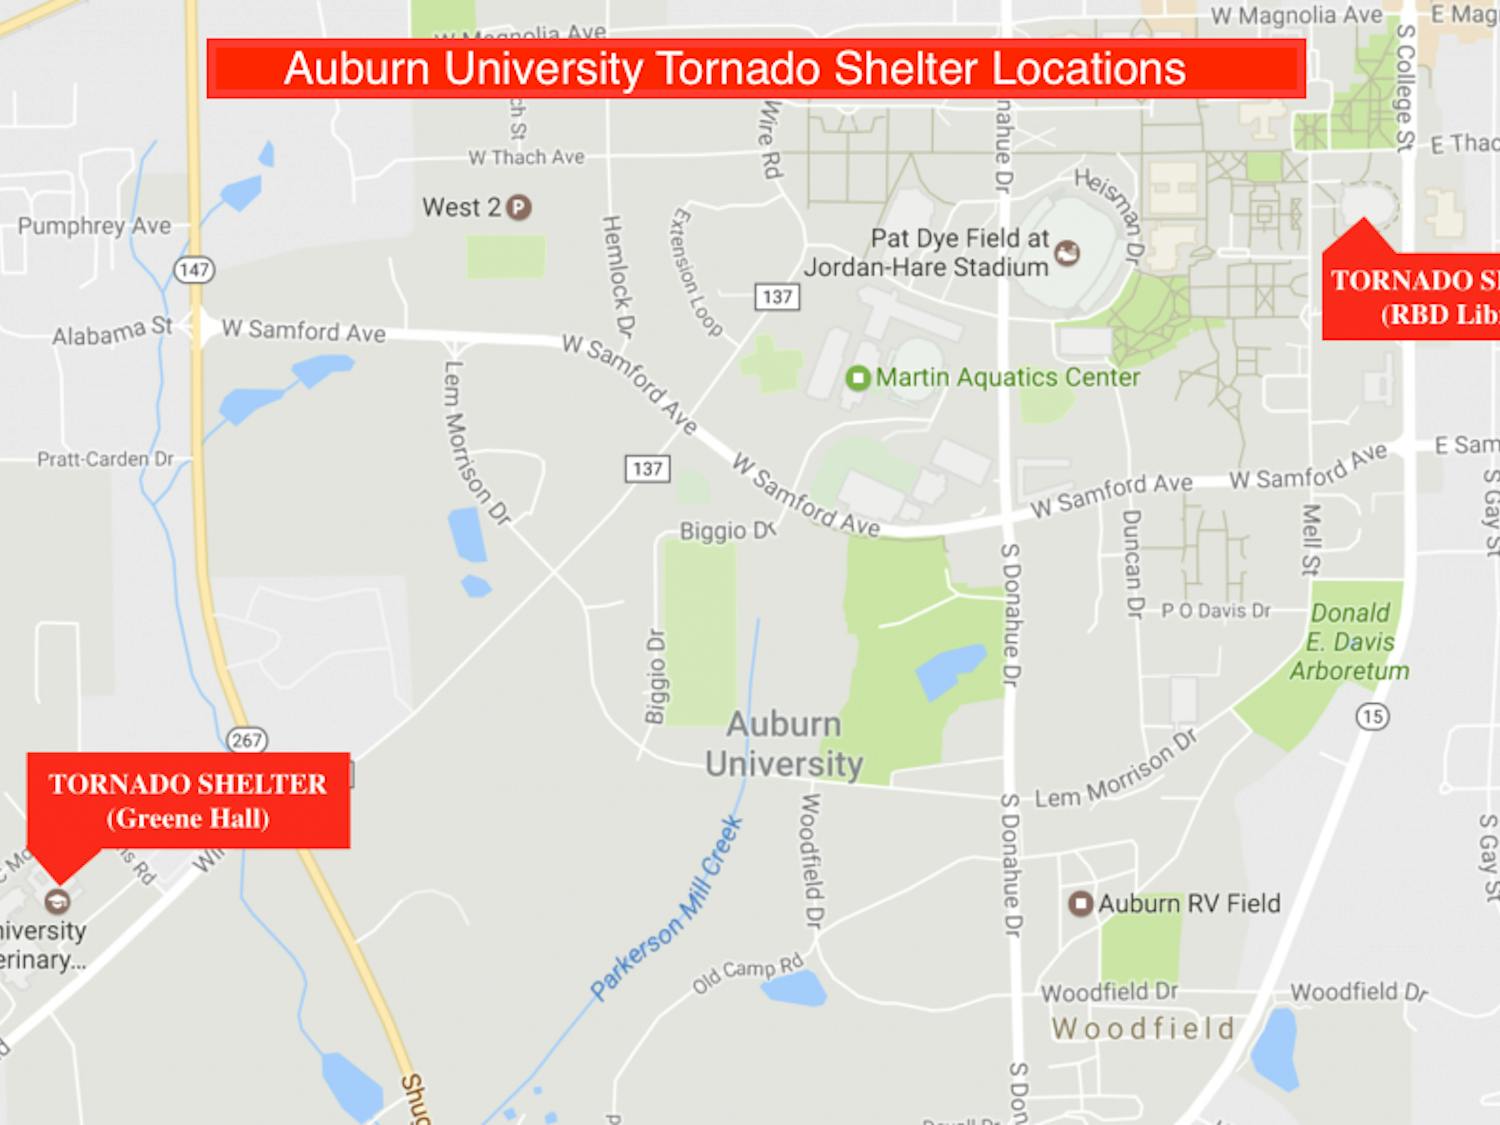 Auburn University Tornado Shelters at Greene Hall and RBD Library during Tornado Watches and Warnings